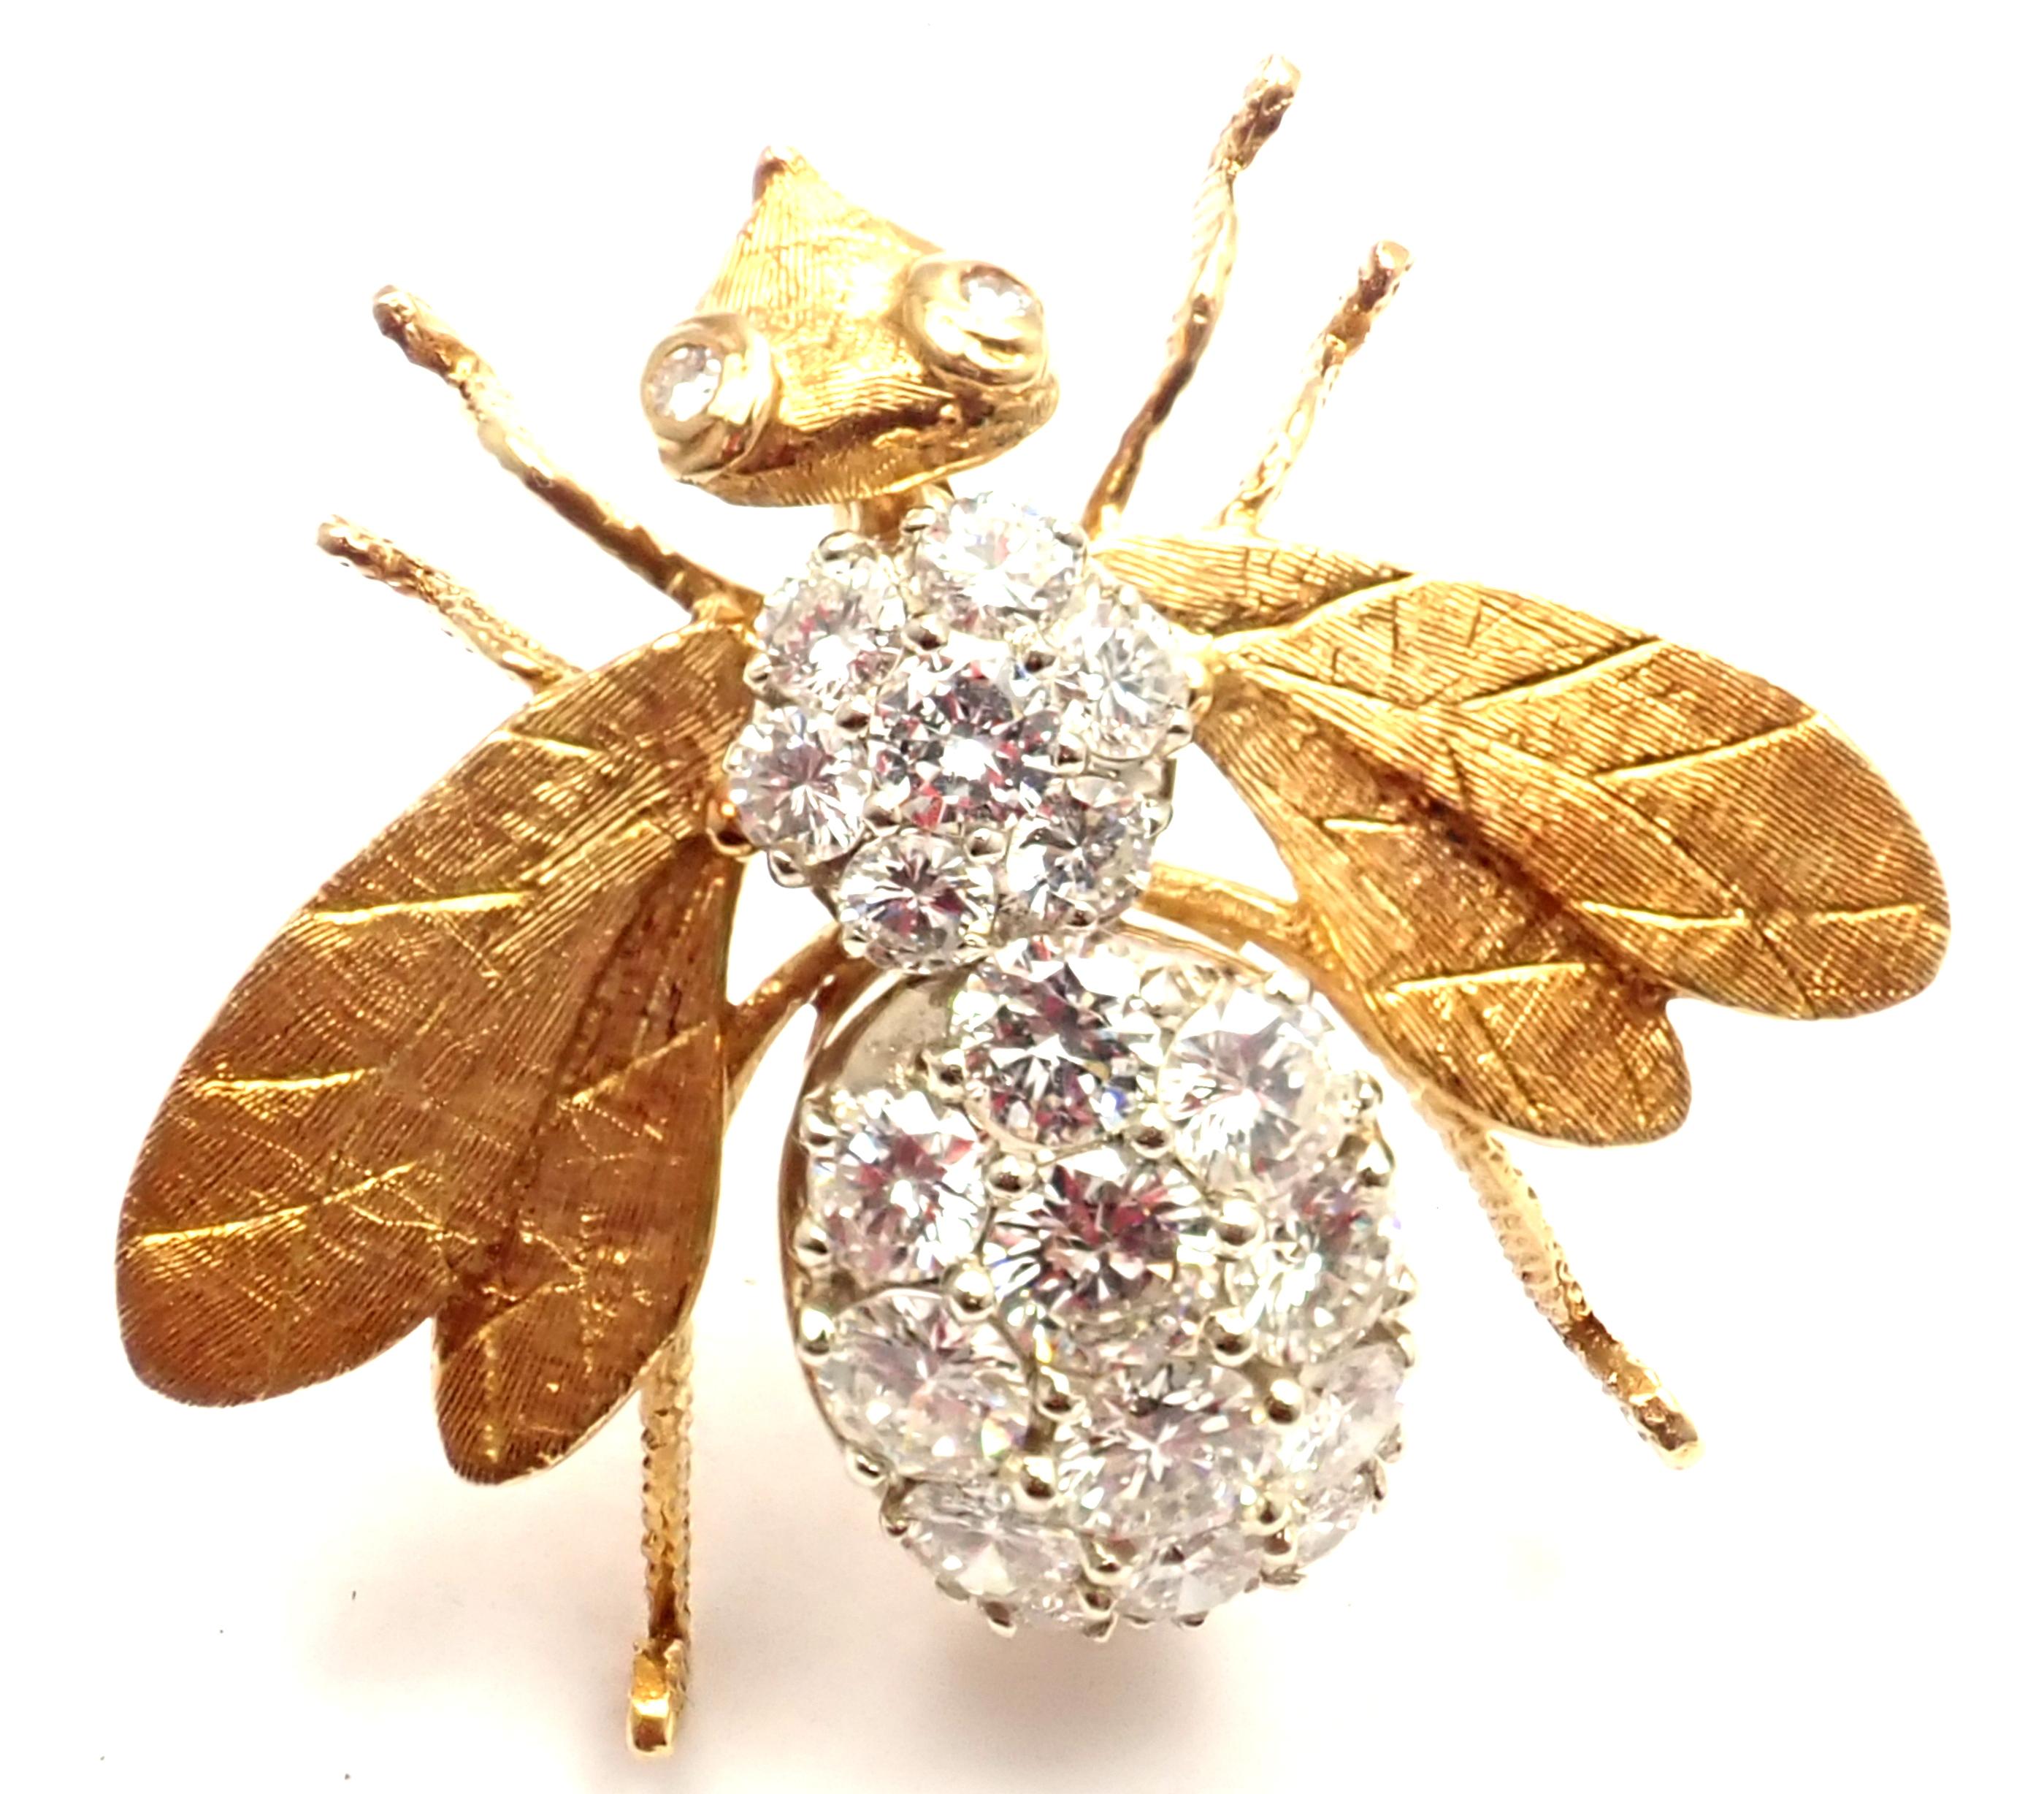 18k Yellow Gold Diamond Extra Large Bee Pin Brooch by Herbert Rosenthal.
With 21 round brilliant cut diamonds VS1 Clarity, G Color total weight approximately 4ct
Details:
Measurements Brooch: 1 1/4